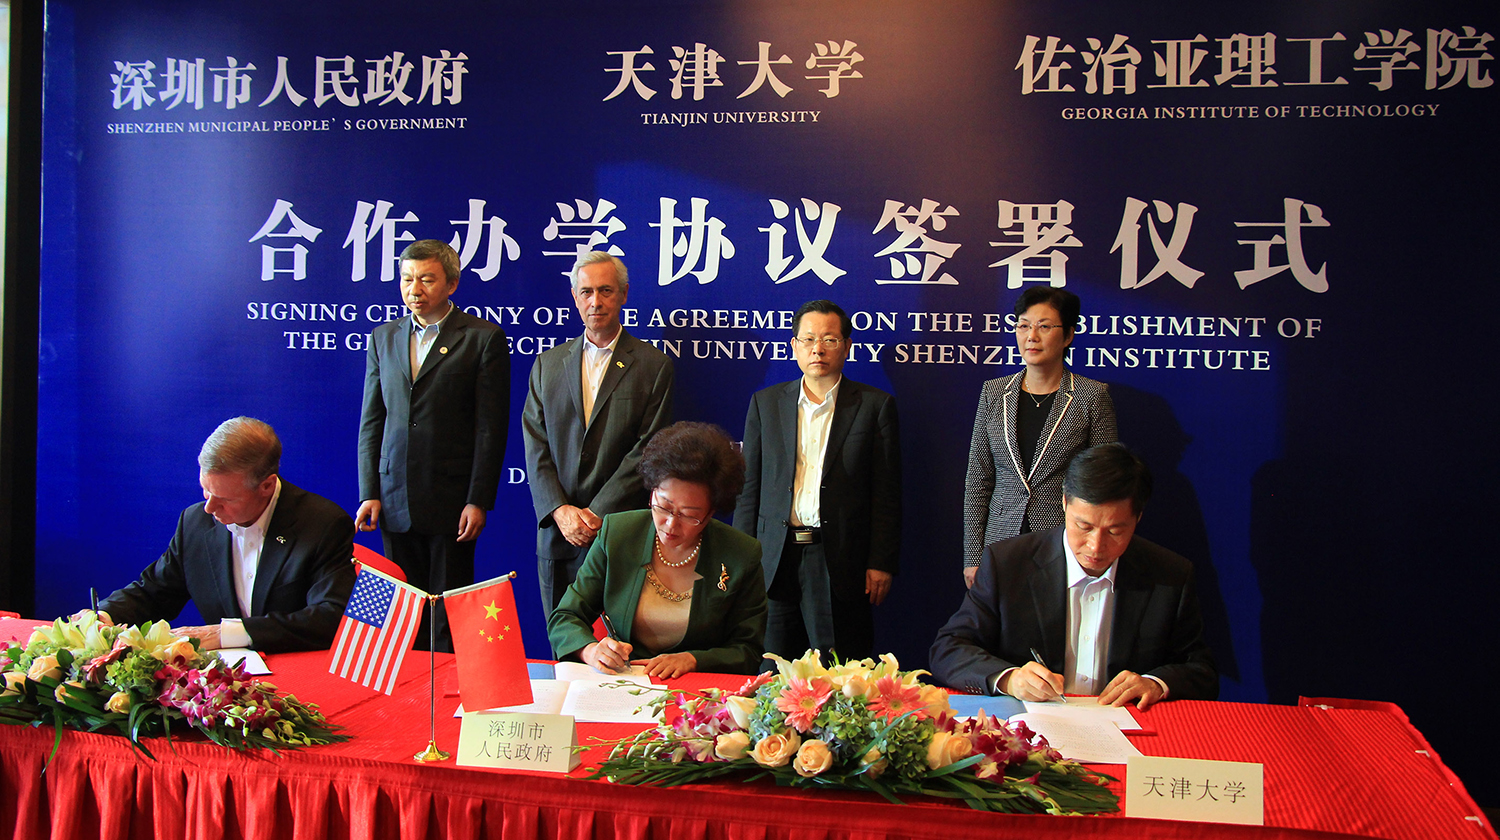 Georgia Tech’s President G. P. “Bud” Peterson, seated left, signed an agreement in a ceremony in Shenzhen, China, on Dec. 2 to create a new collaboration with the city of Shenzhen and Tianjin University. Co-signers with Peterson are Vice Mayor Yihuan Wu of Shenzhen Municipal People's Government, center, and Tianjin University President Denghua Zhong, right.